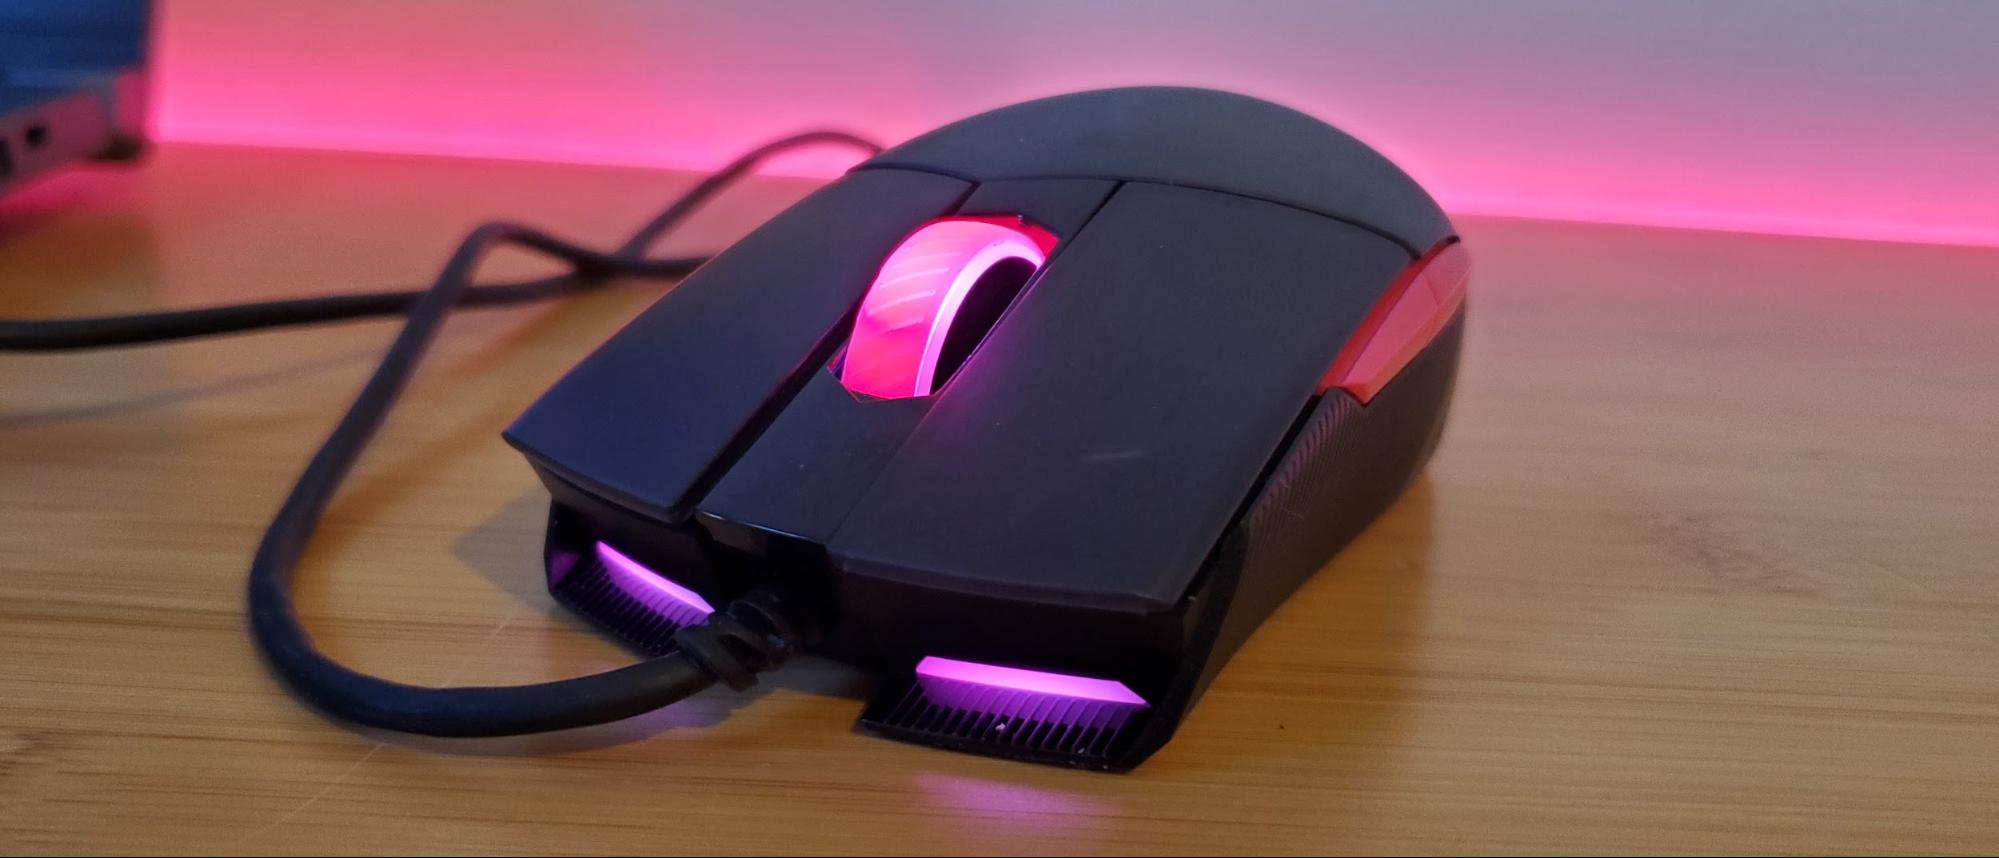 Asus Rog Strix Impact Ii Electro Punk Mouse Review Style Over Substance Tom S Hardware